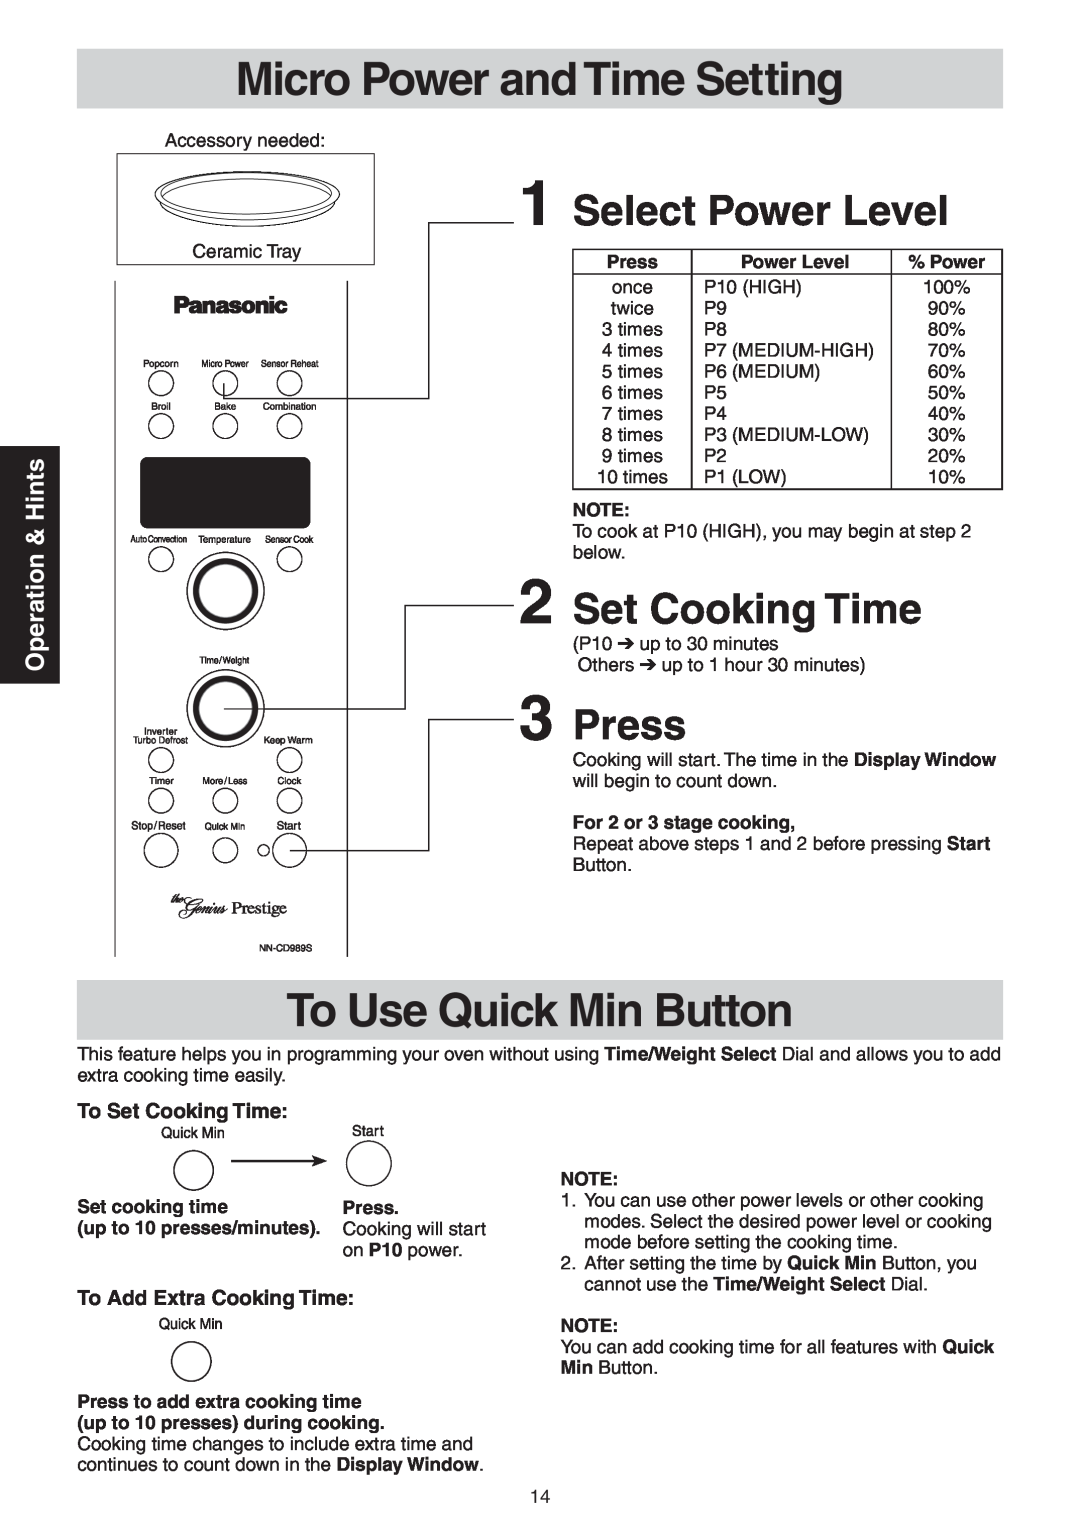 Panasonic NN-CD989S Micro Power and Time Setting, To Use Quick Min Button, 1Select Power Level, 2Set Cooking Time, 3Press 